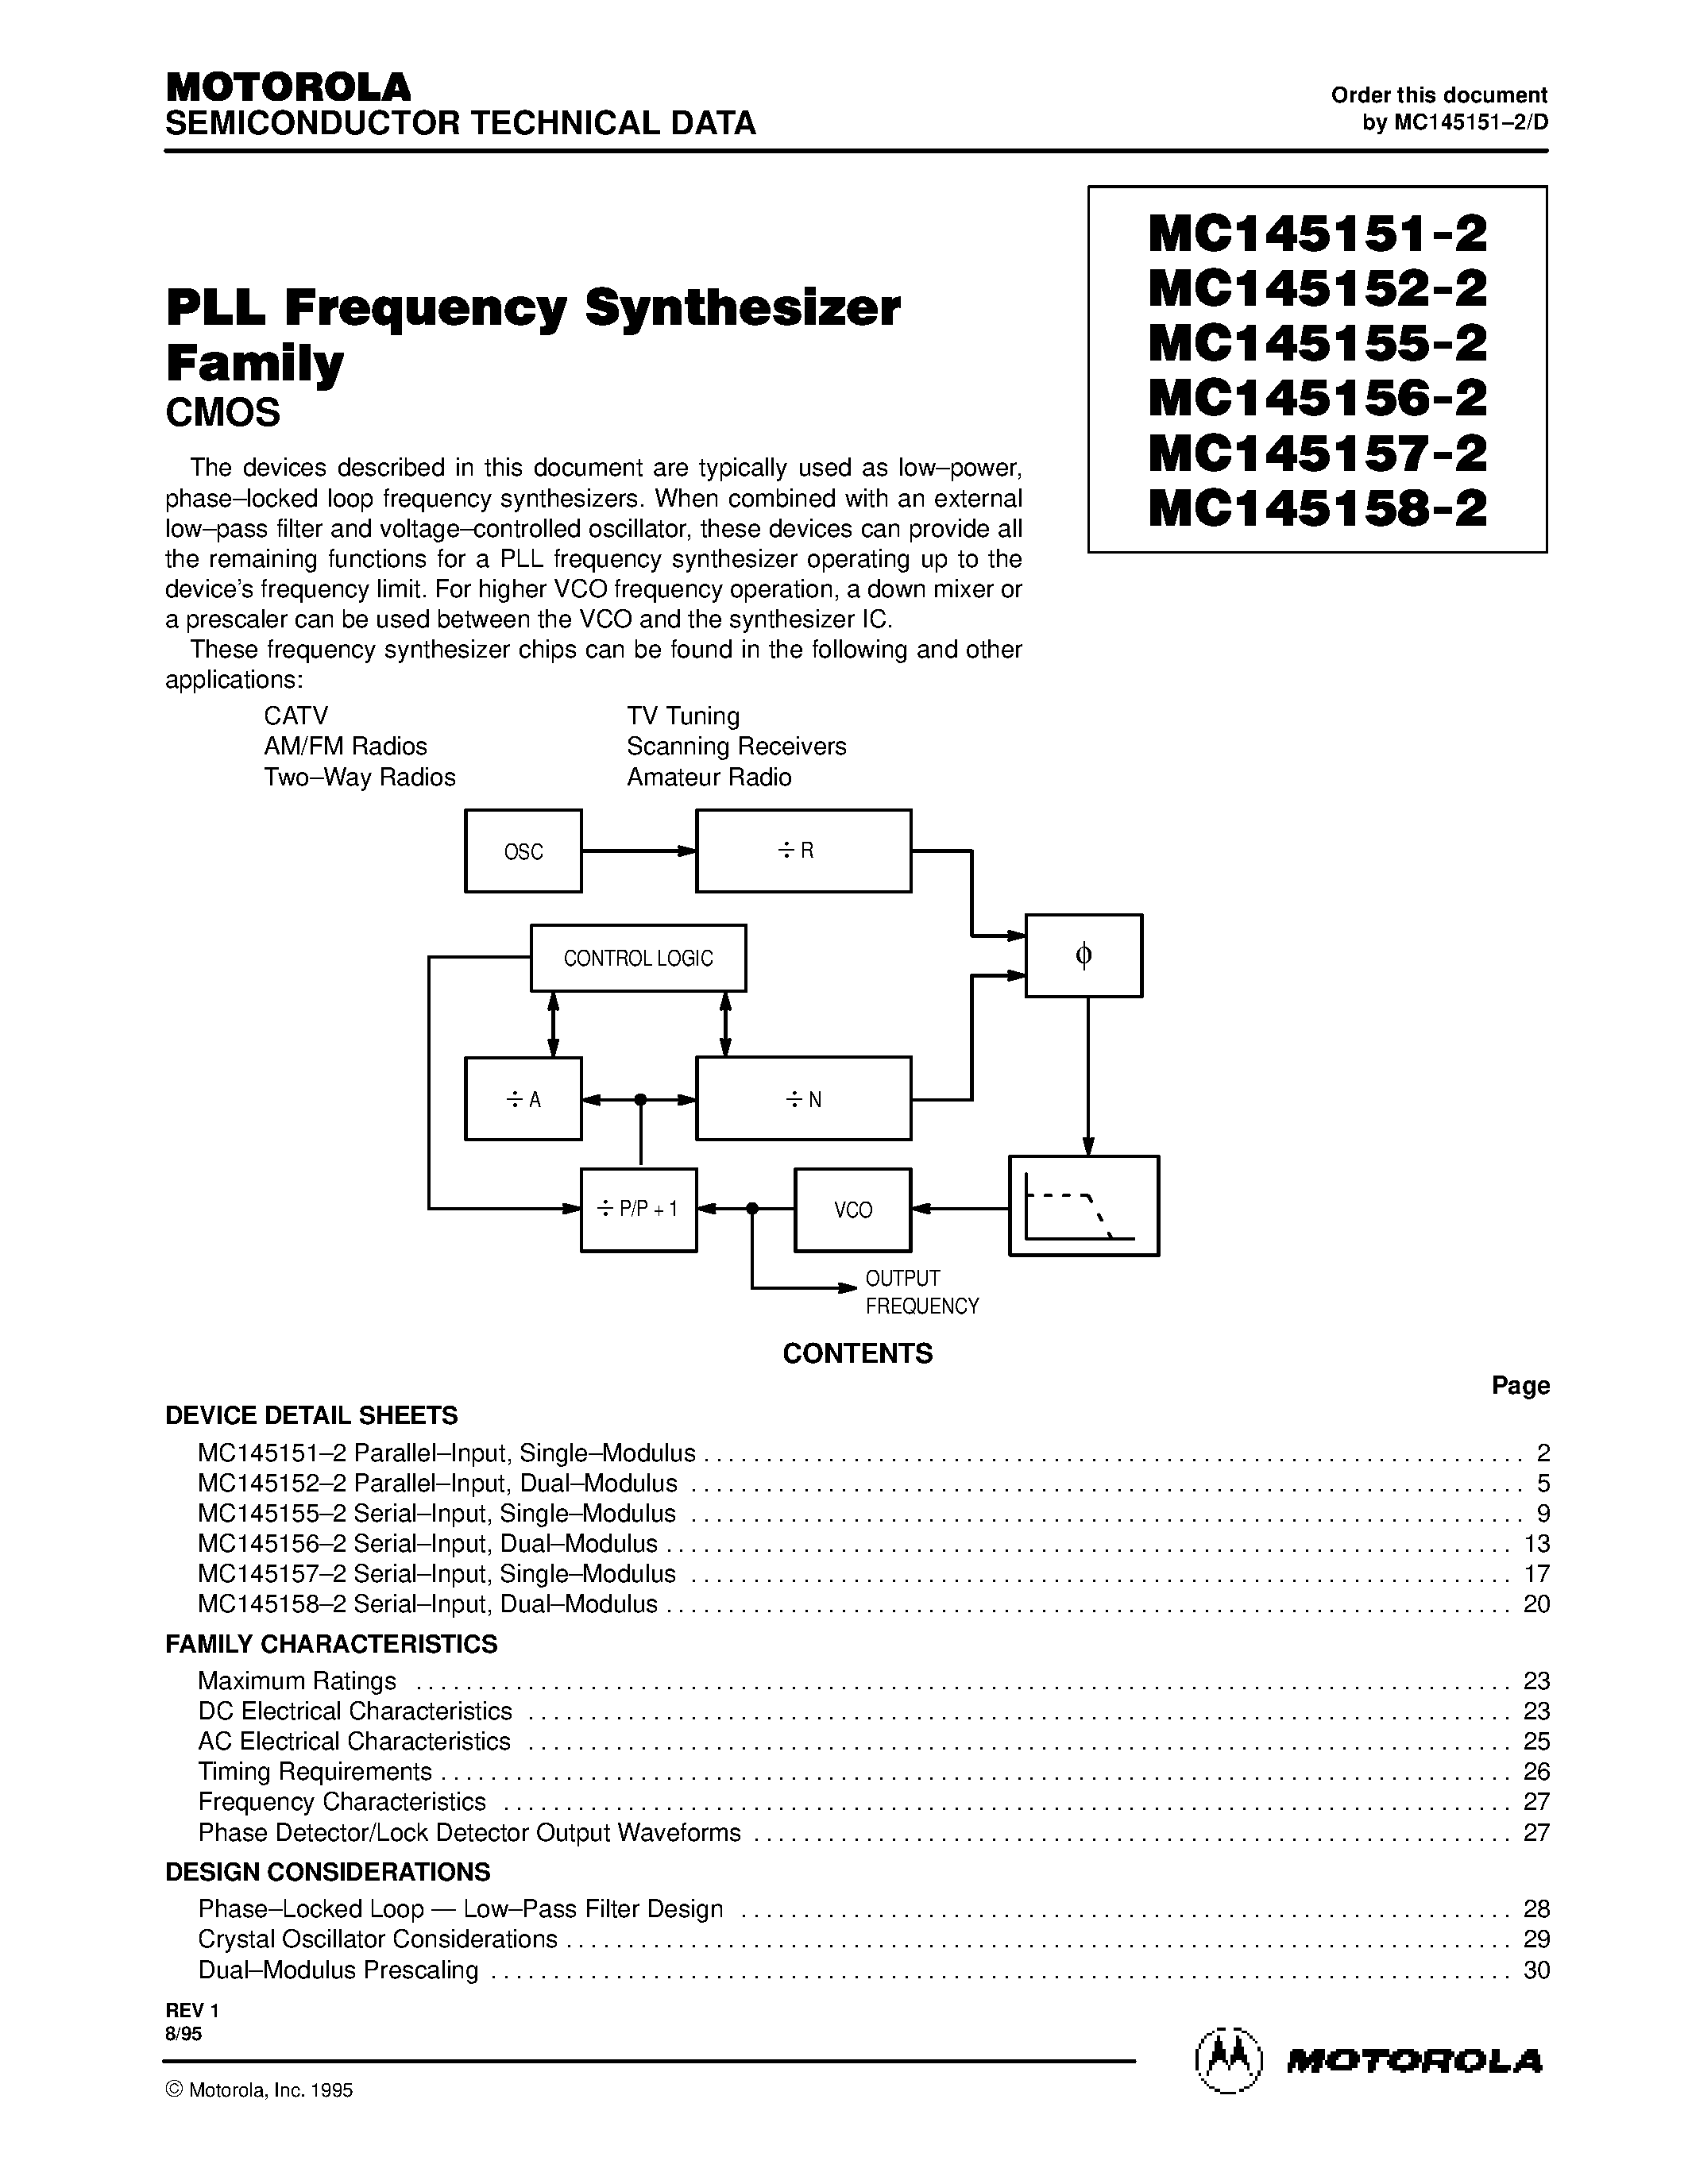 Datasheet MC145151-2 - (MC145151-2 - MC145158-2) Parallel-Input PLL Frequency Synthesizer page 1